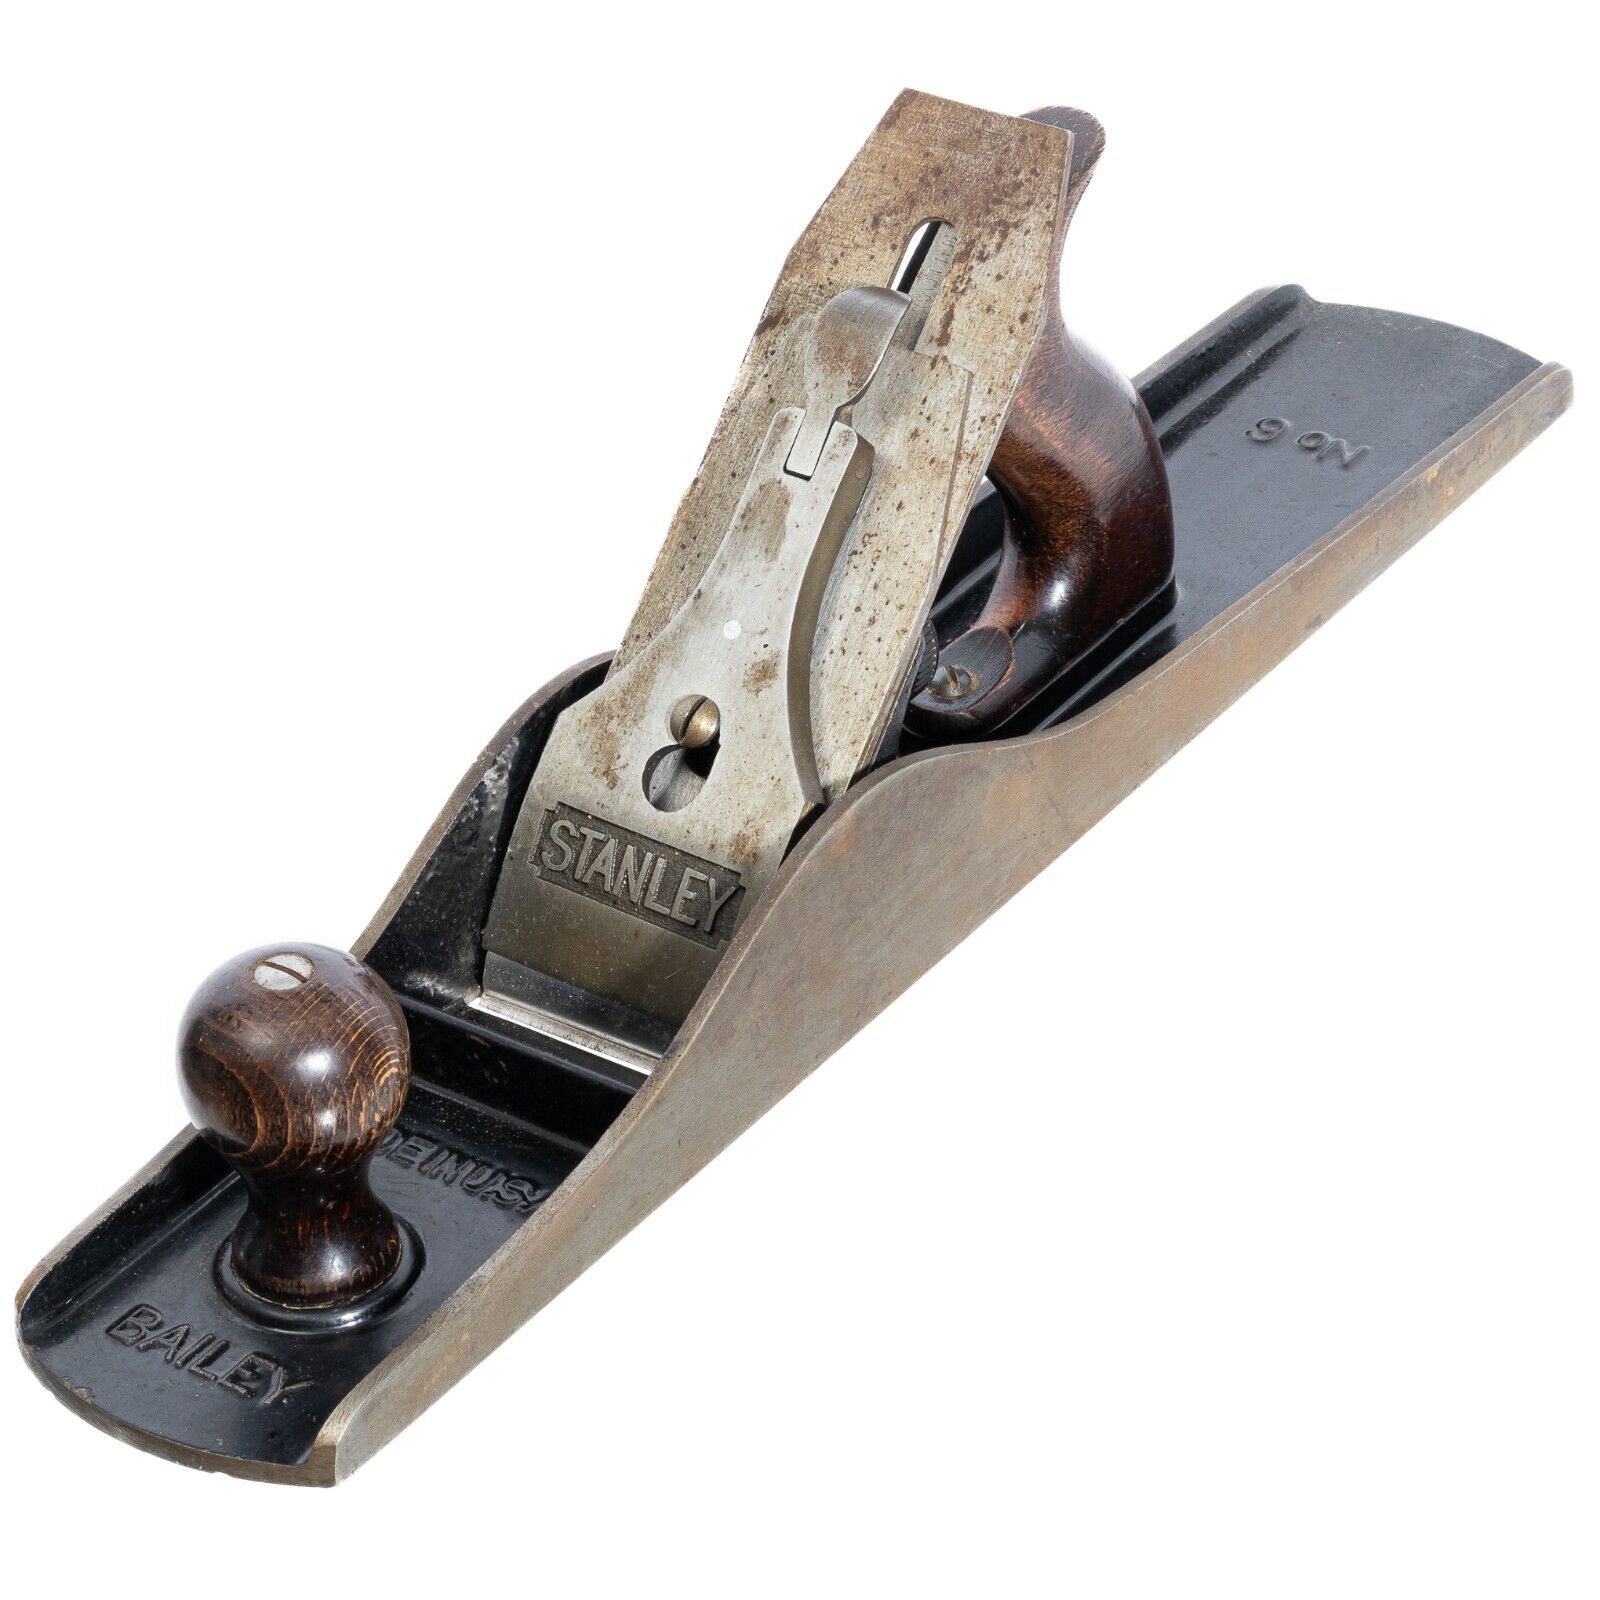 Stanley No. 6 Fore Plane - Type 17 WWII Era, 1942-1945